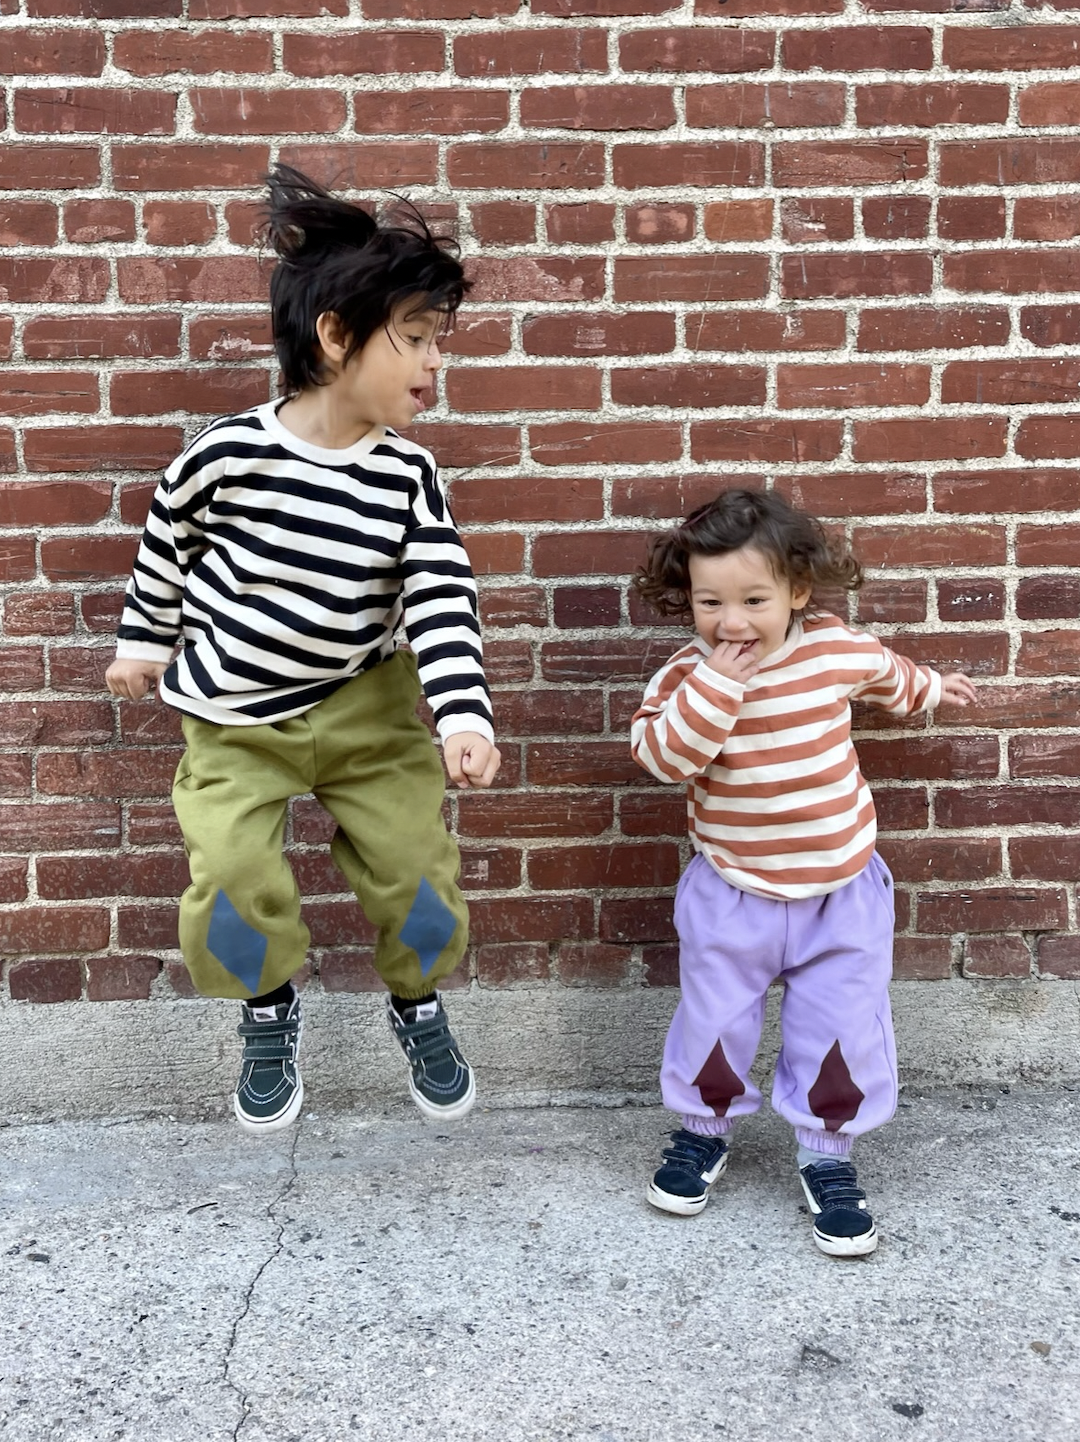 Black | Two children jumping in the air, wearing kids' tee shirts, one black and white, the other peaches and cream